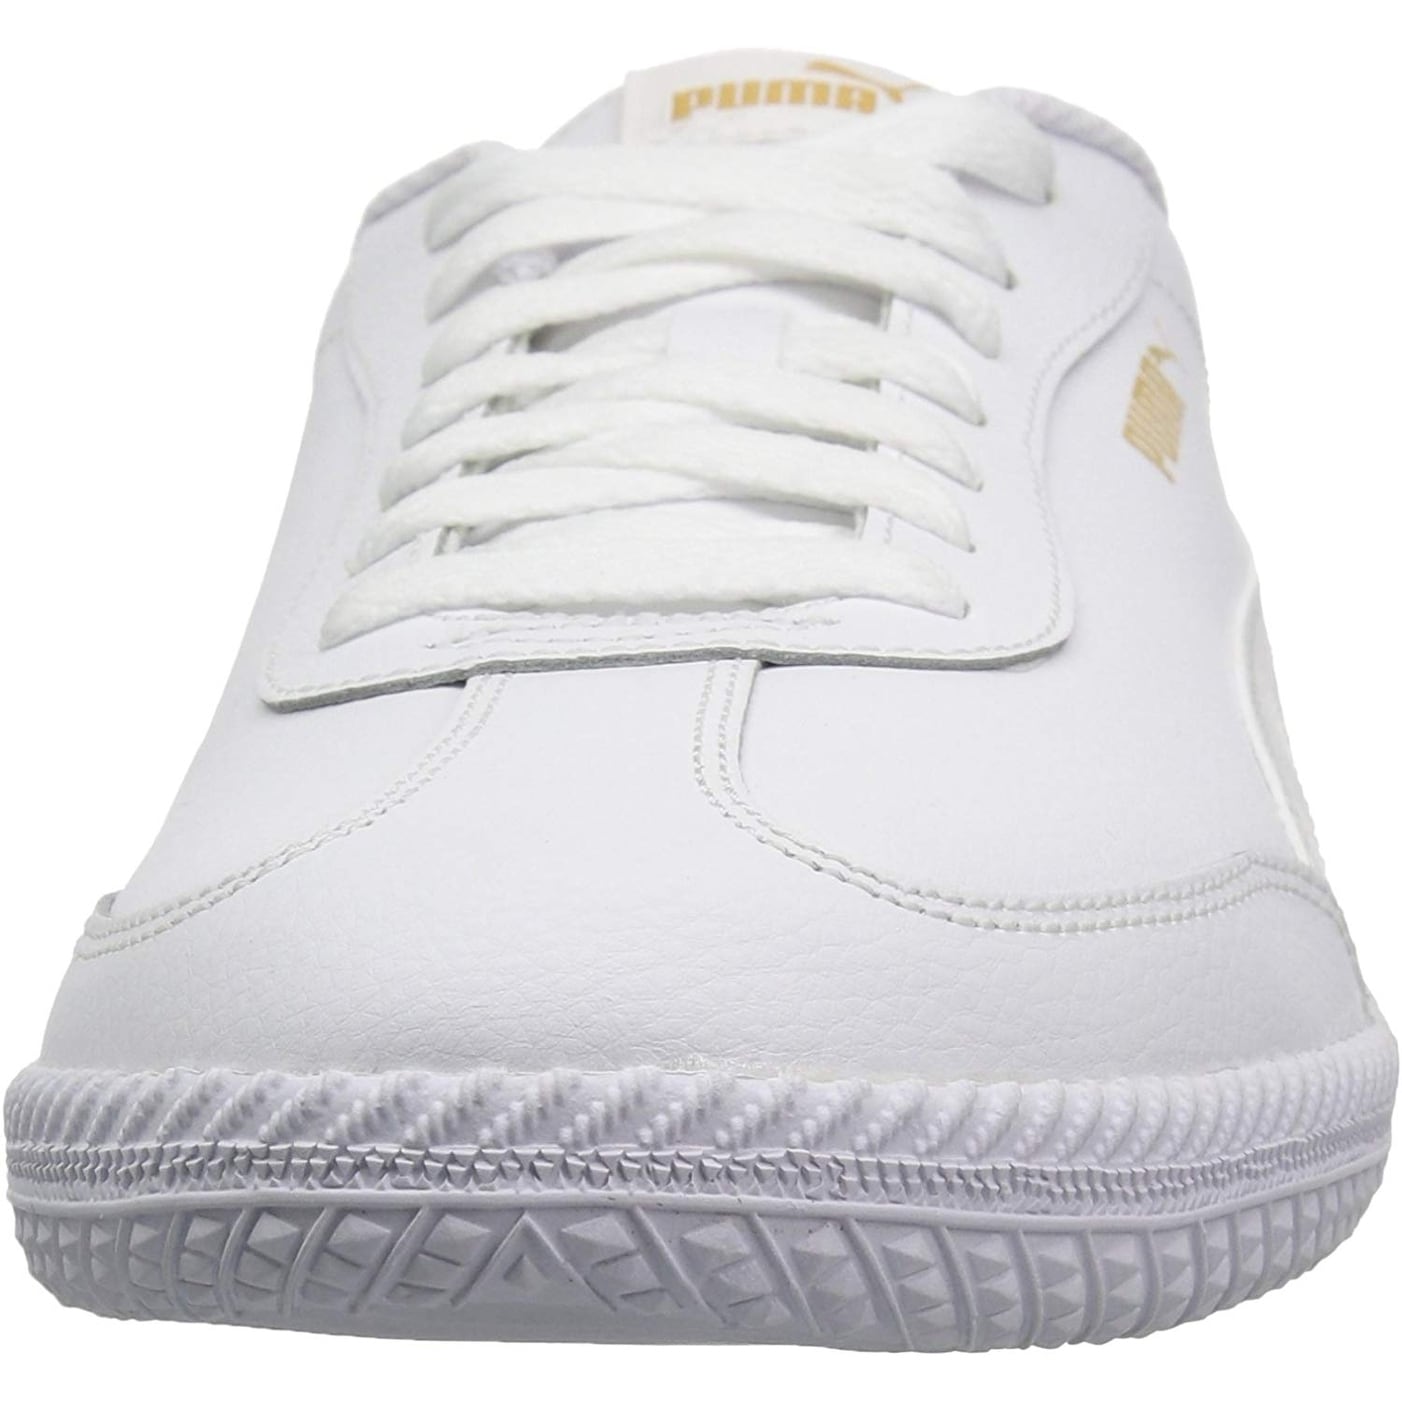 puma men's astro cup leather sneakers